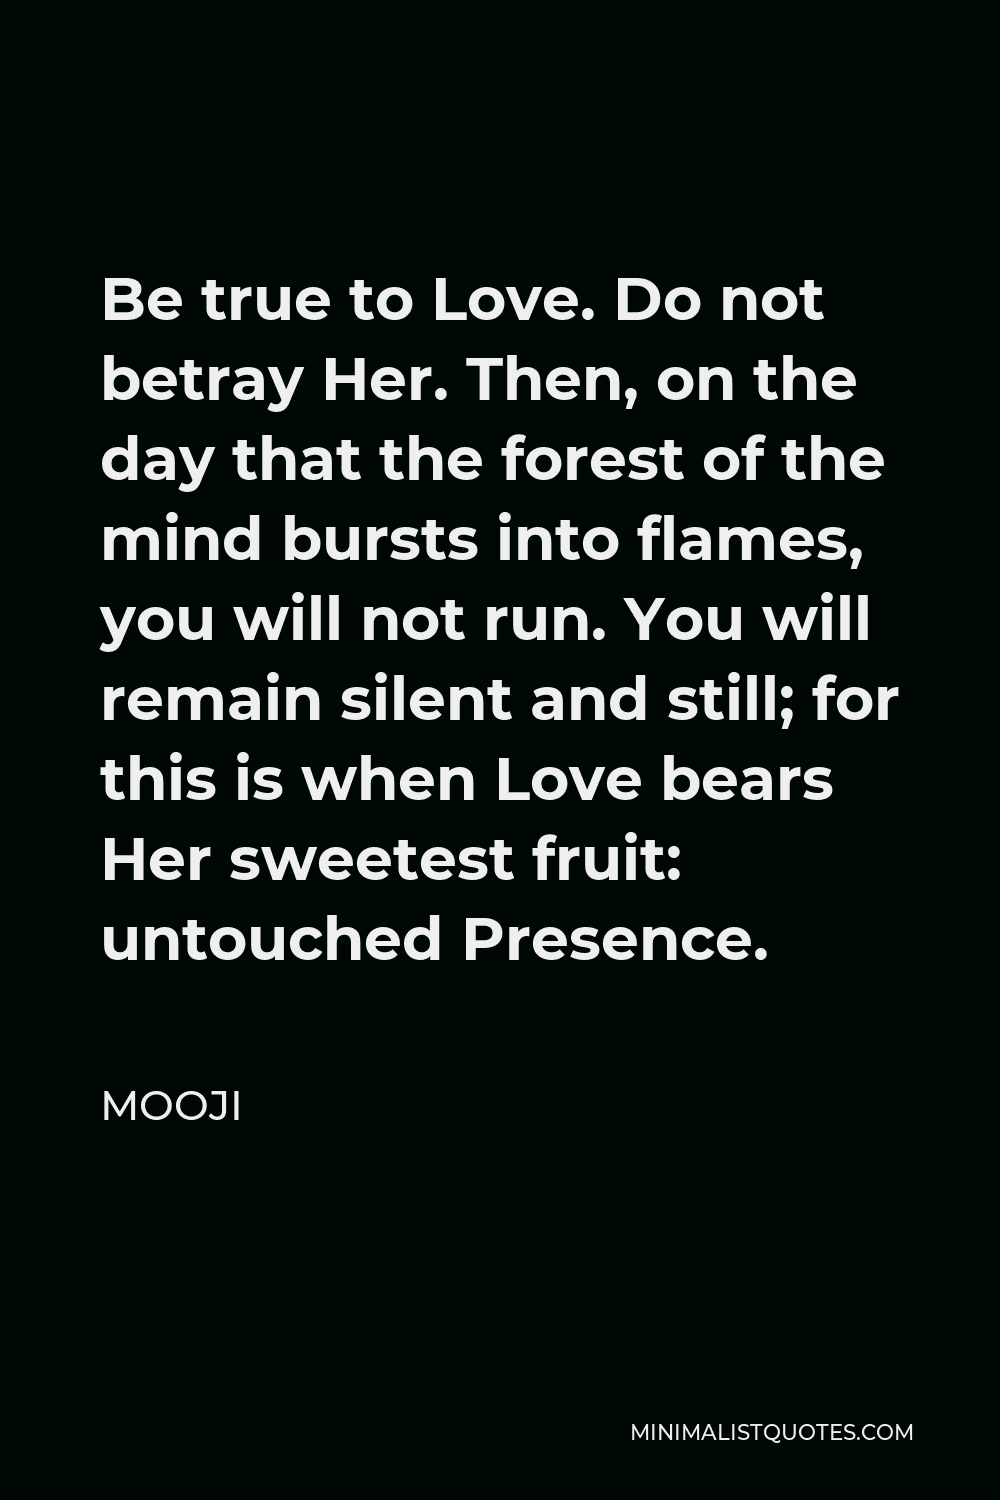 Mooji Quote - Be true to Love. Do not betray Her. Then, on the day that the forest of the mind bursts into flames, you will not run. You will remain silent and still; for this is when Love bears Her sweetest fruit: untouched Presence.